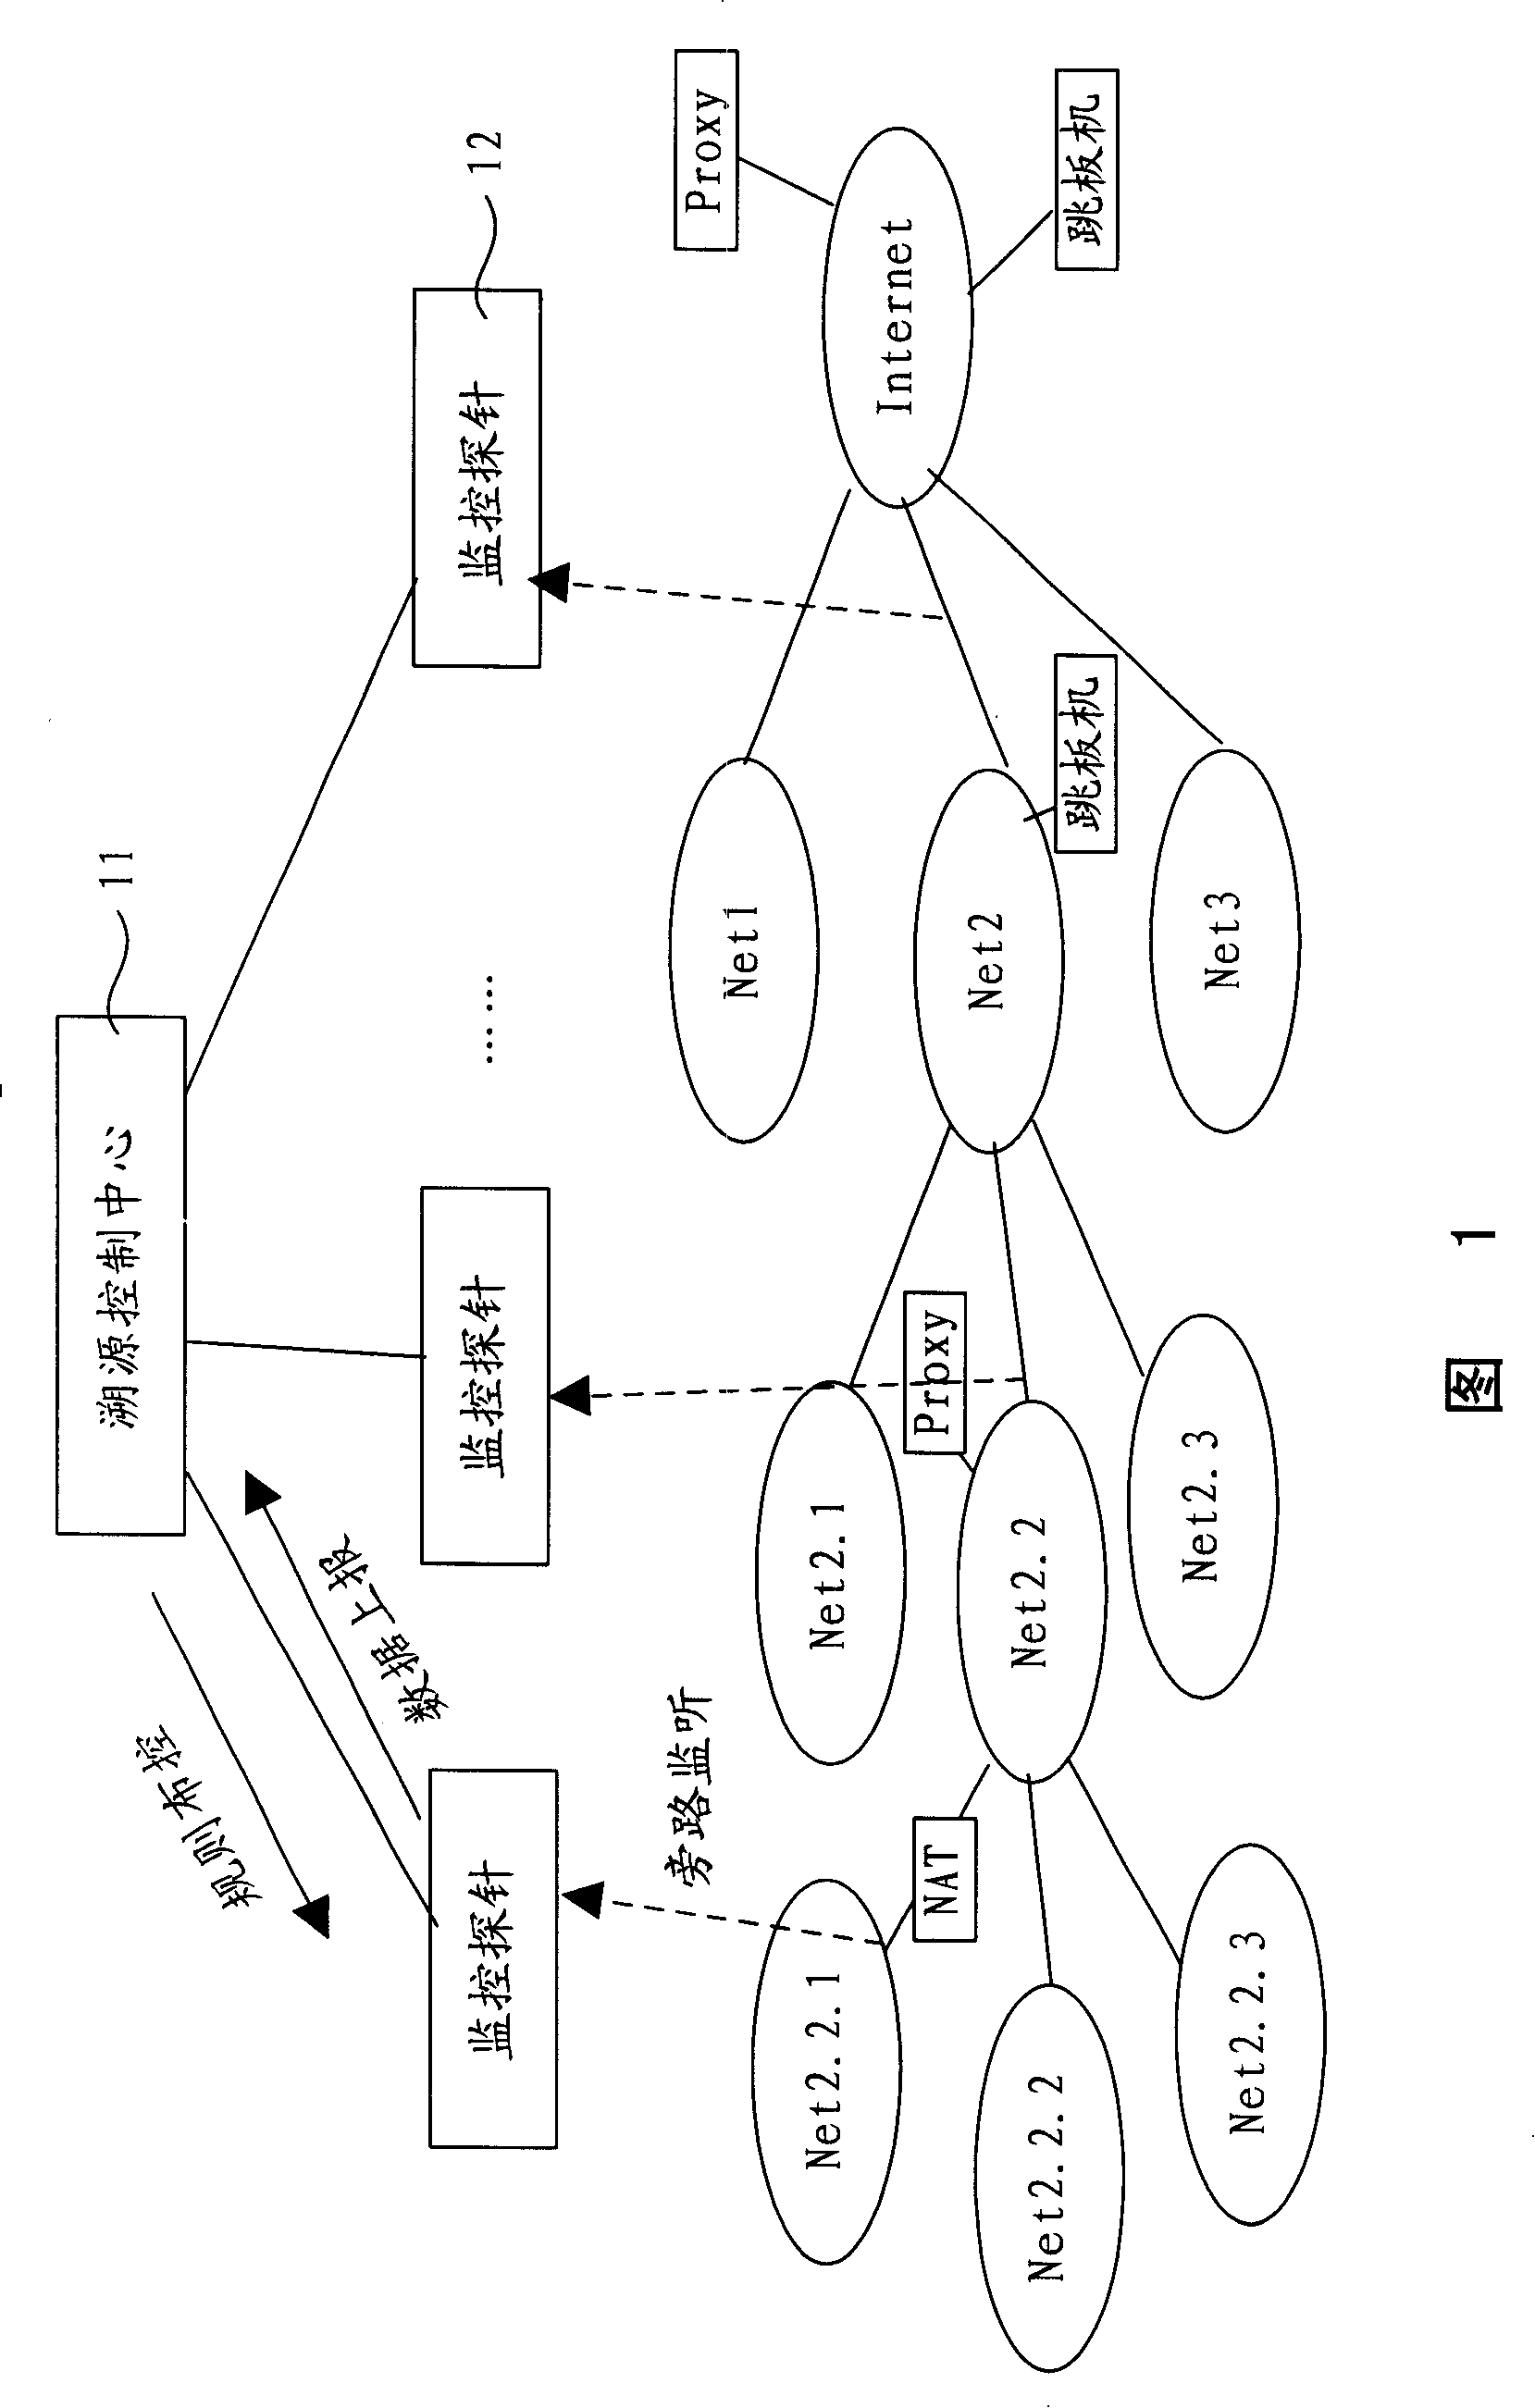 Detecting probe interlock based network security event tracking system and method